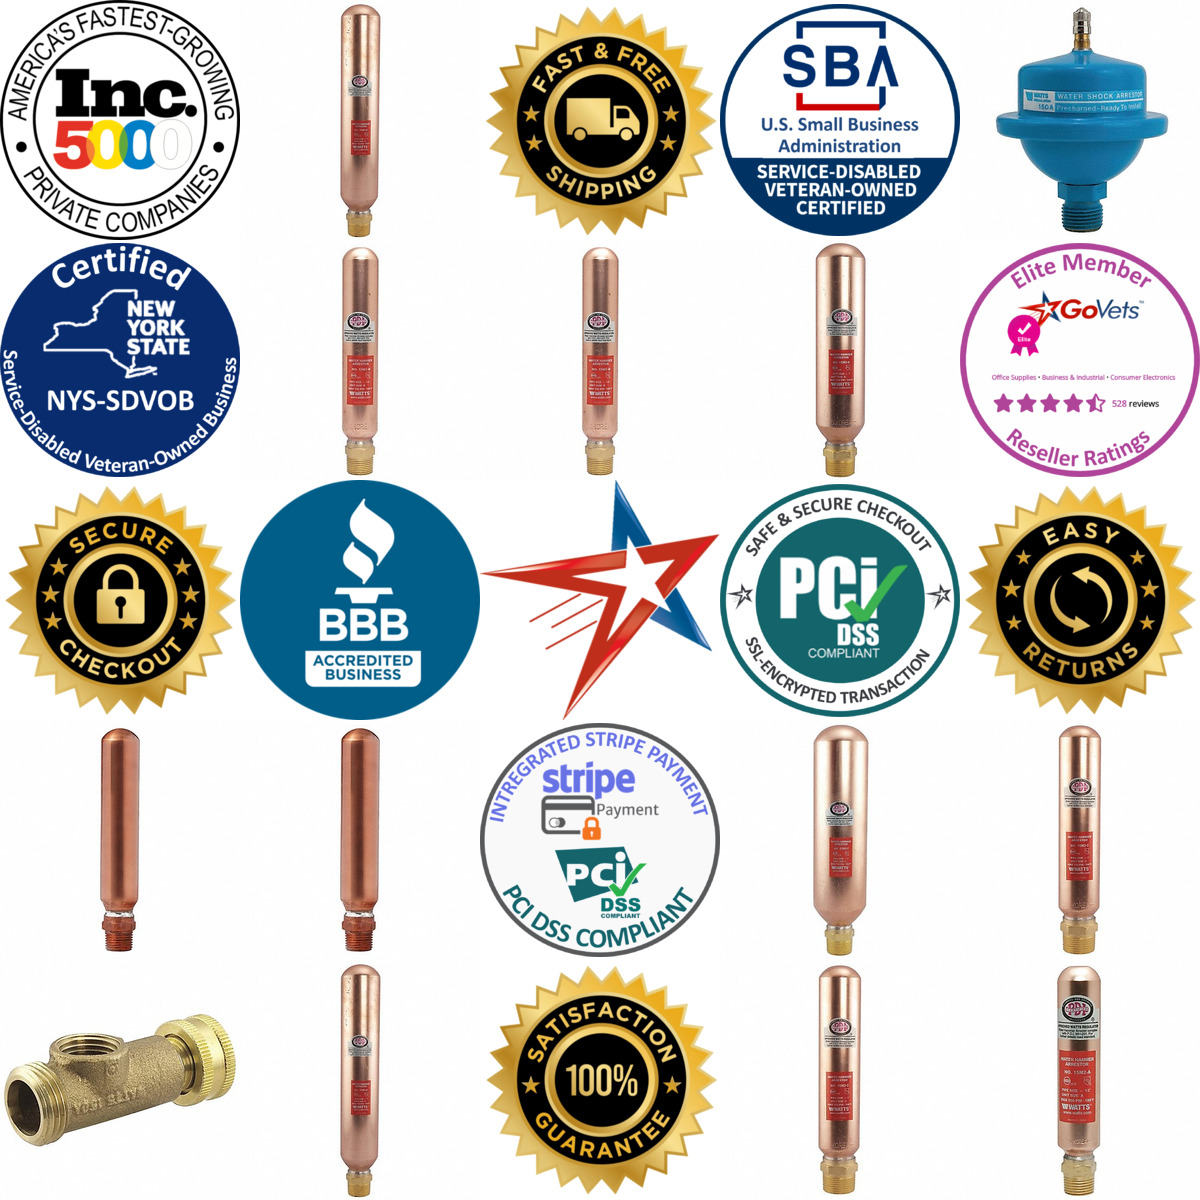 A selection of Water Hammer Arrestors products on GoVets